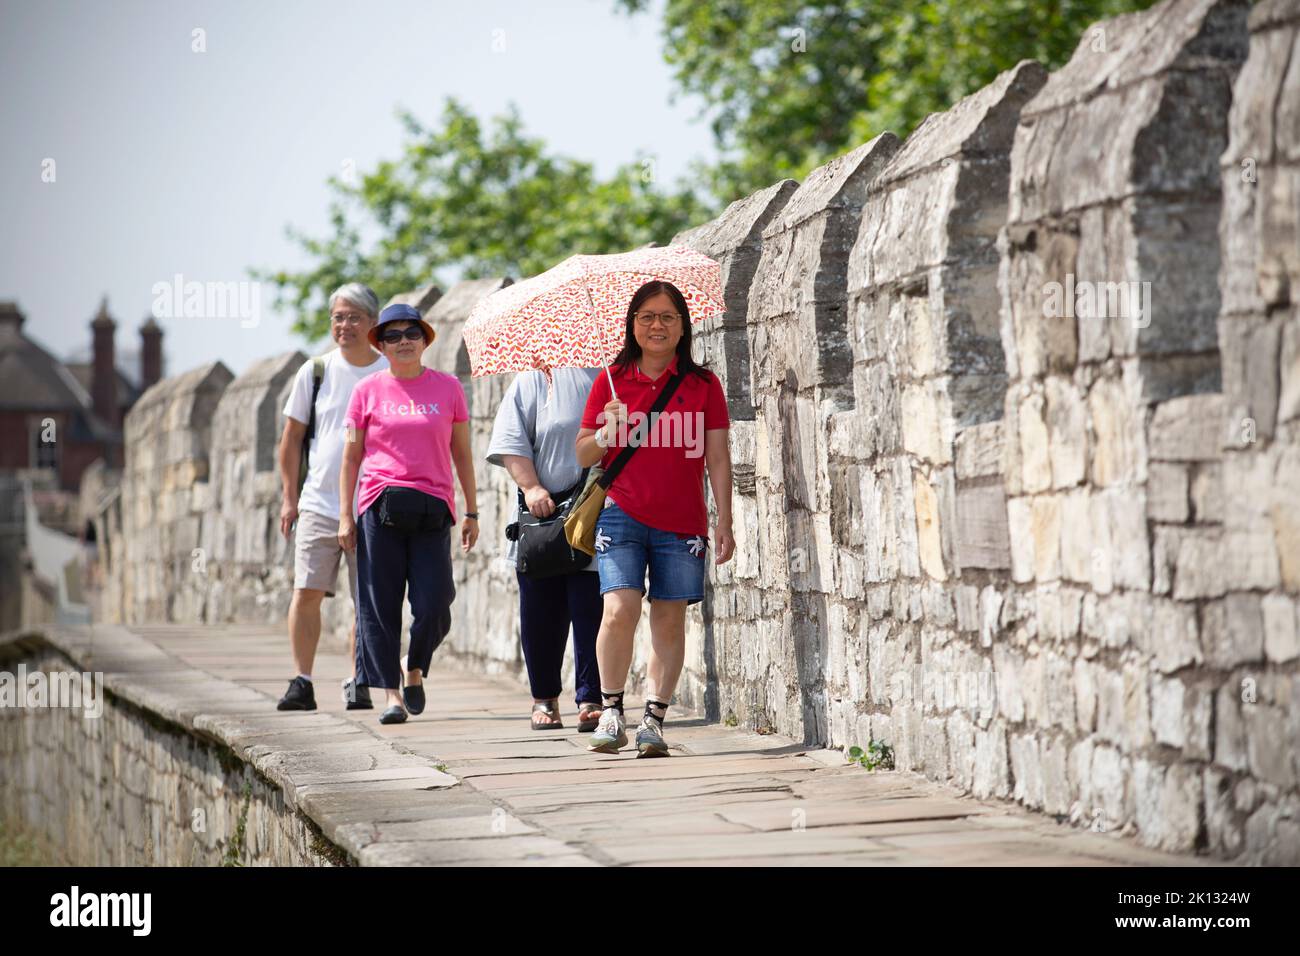 A woman on York’s city wall uses an unbrella to protect herself from the sun as people in the city of York, North Yorkshire endure the hottest day on Stock Photo